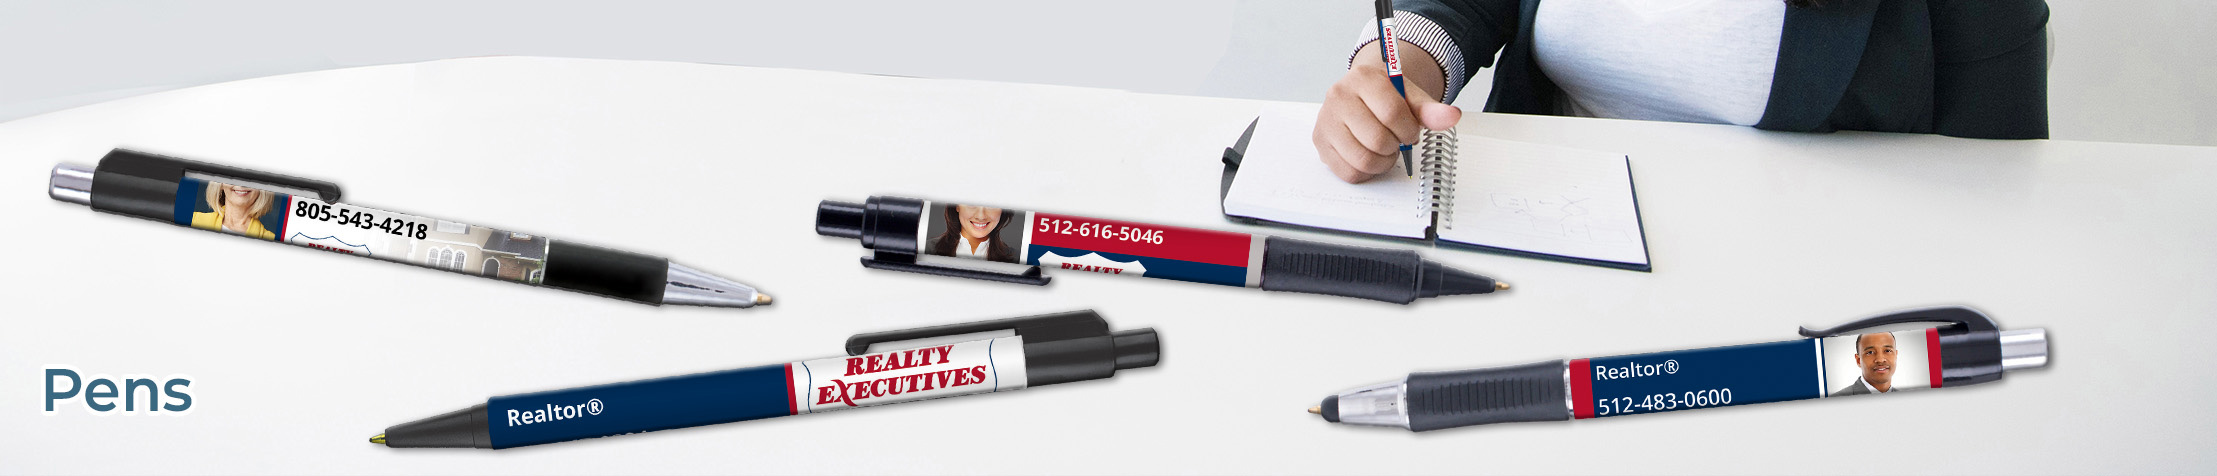 Realty Executives Real Estate Pens - Realty Executives personalized realtor promotional products | BestPrintBuy.com